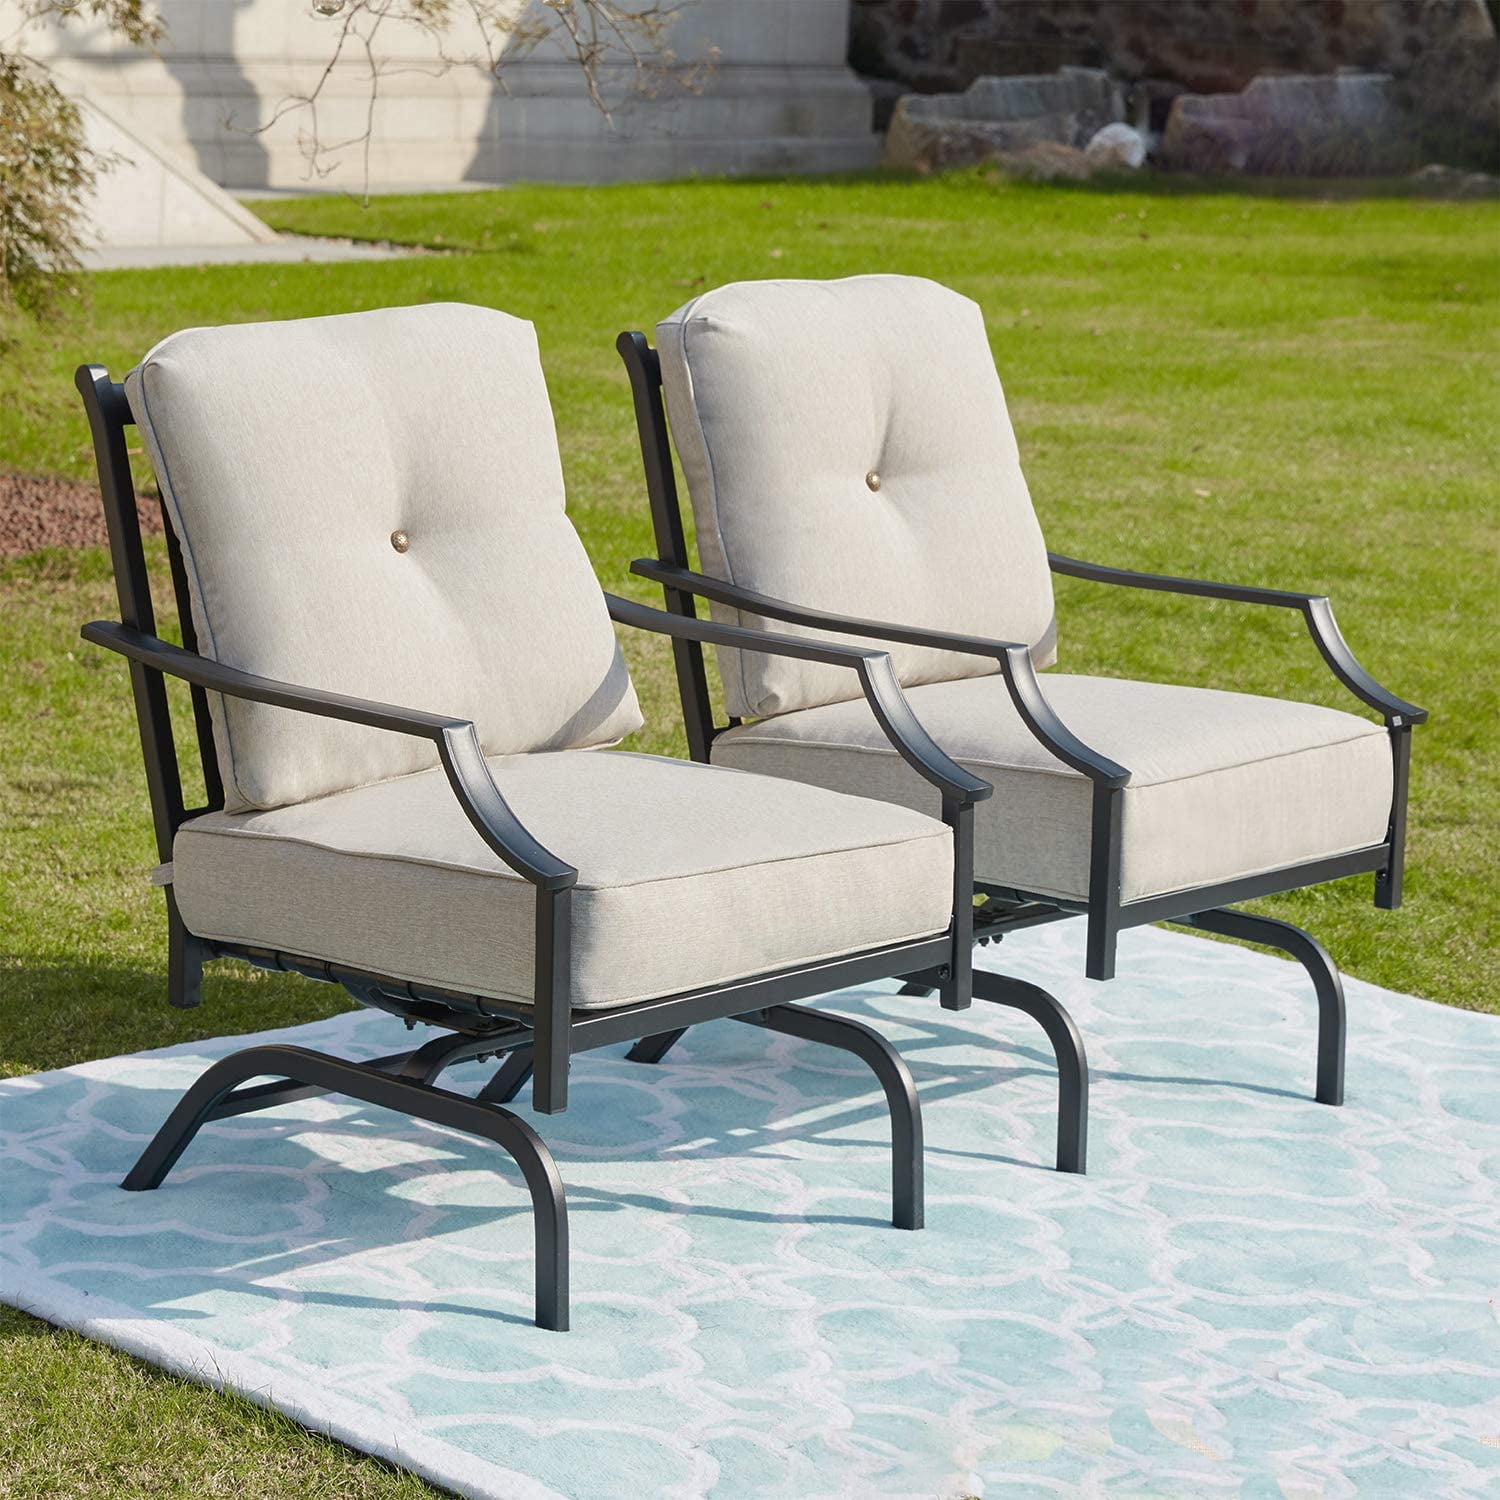 Rocking Patio Chairs Outdoor Metal Furniture Motion Spring Patio Chair